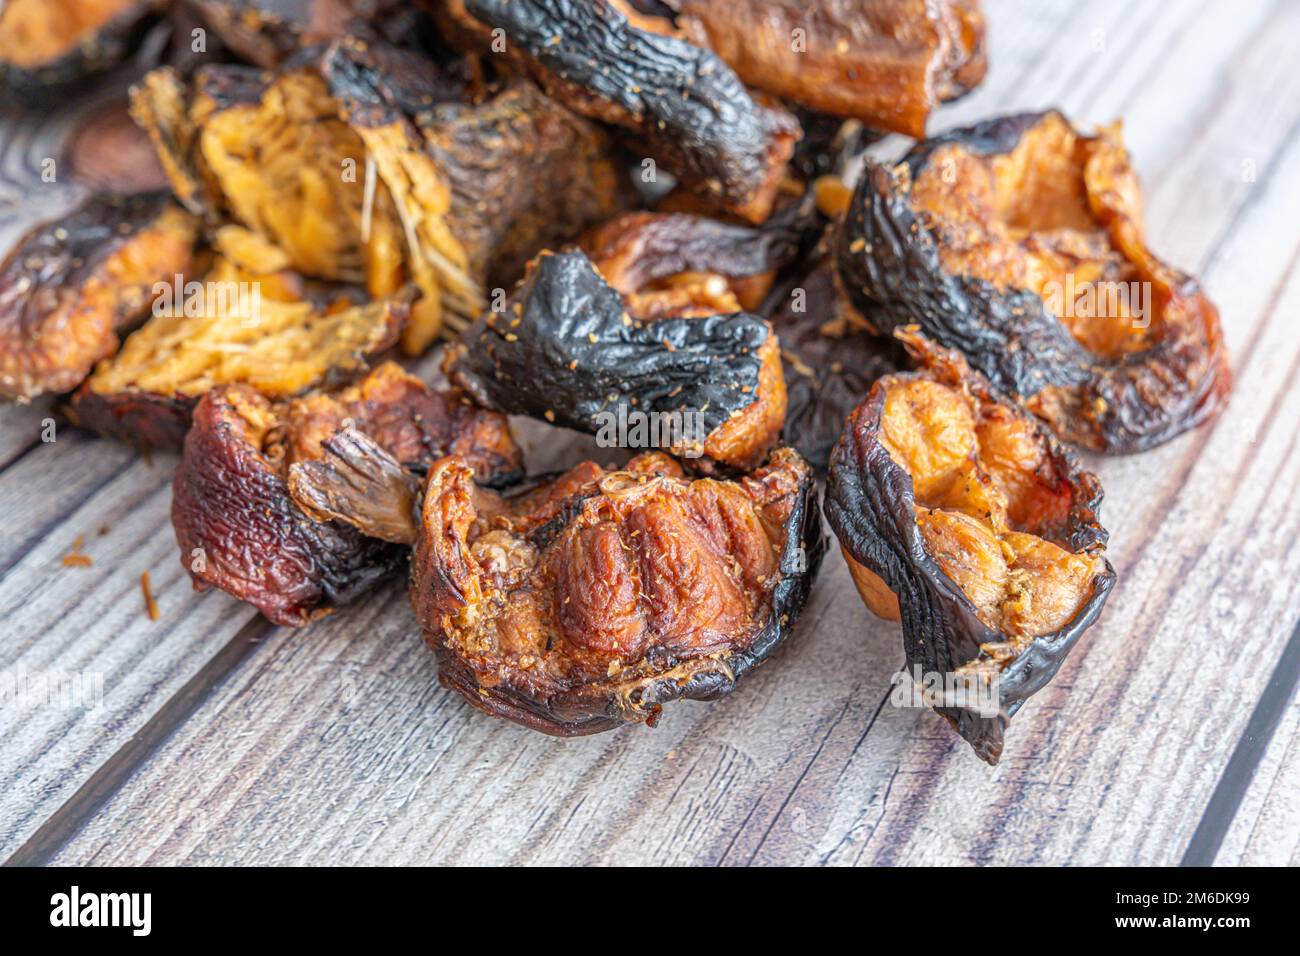 Dried Grilled Nigerian Fish used to prepare Soups and Sauces Stock Photo